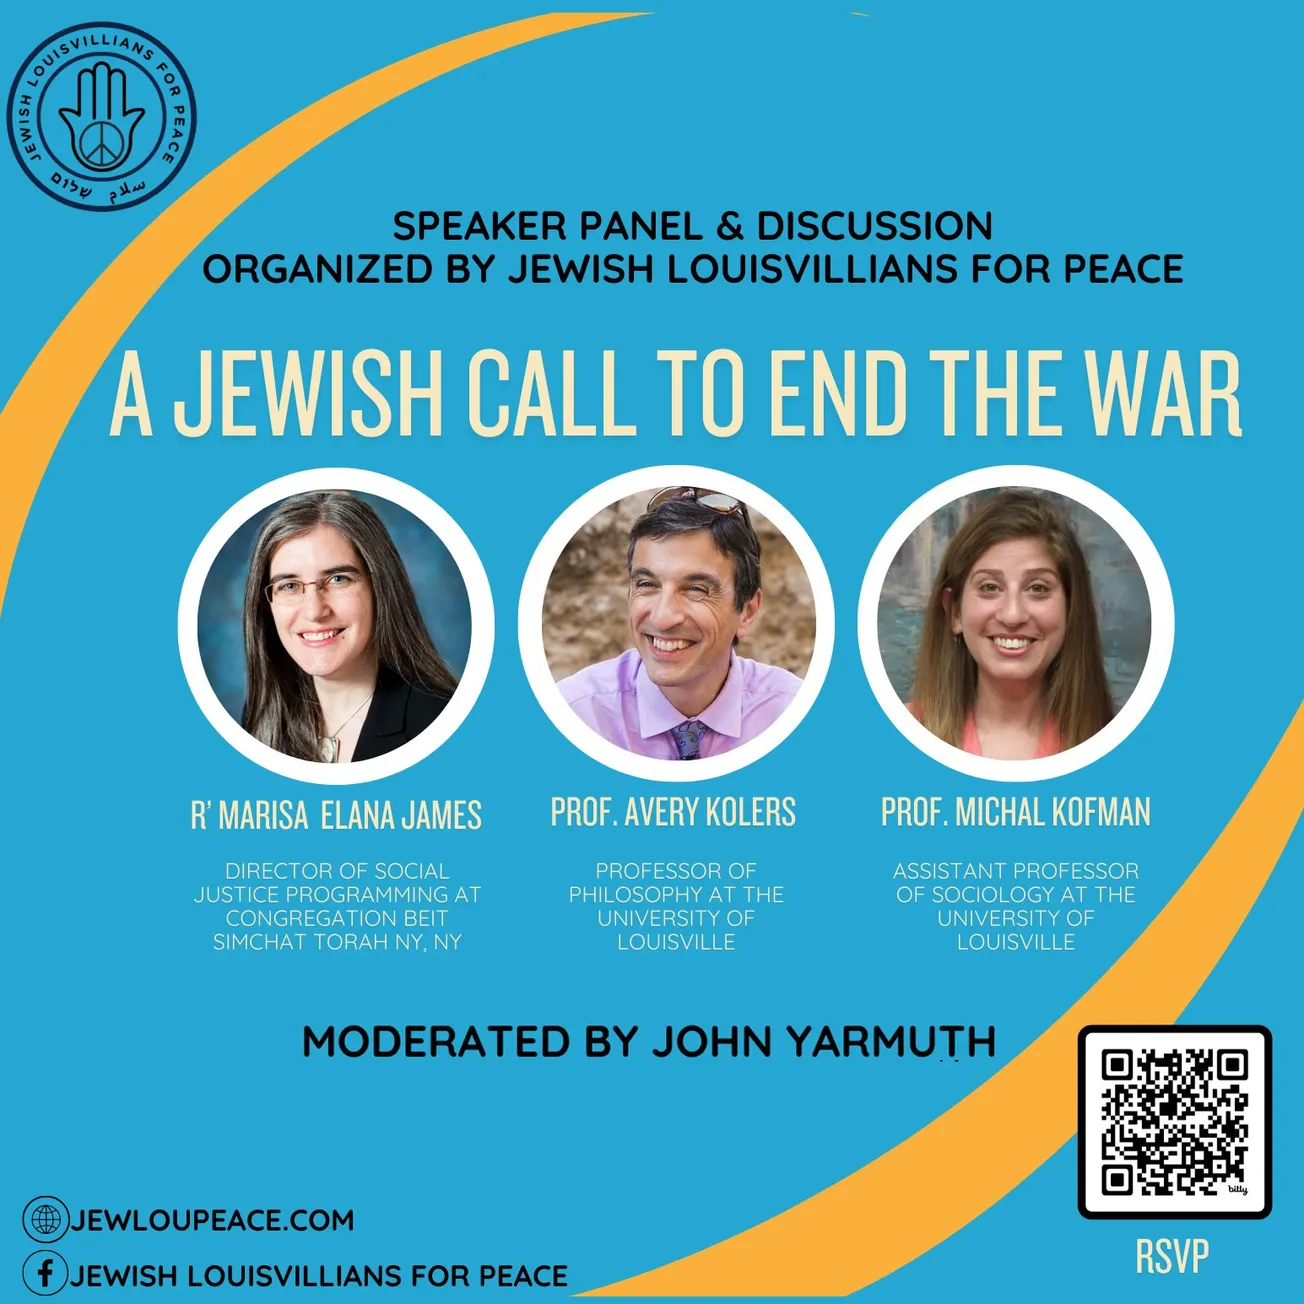 Louisville Jewish group hosts “A Jewish Call to End the War”